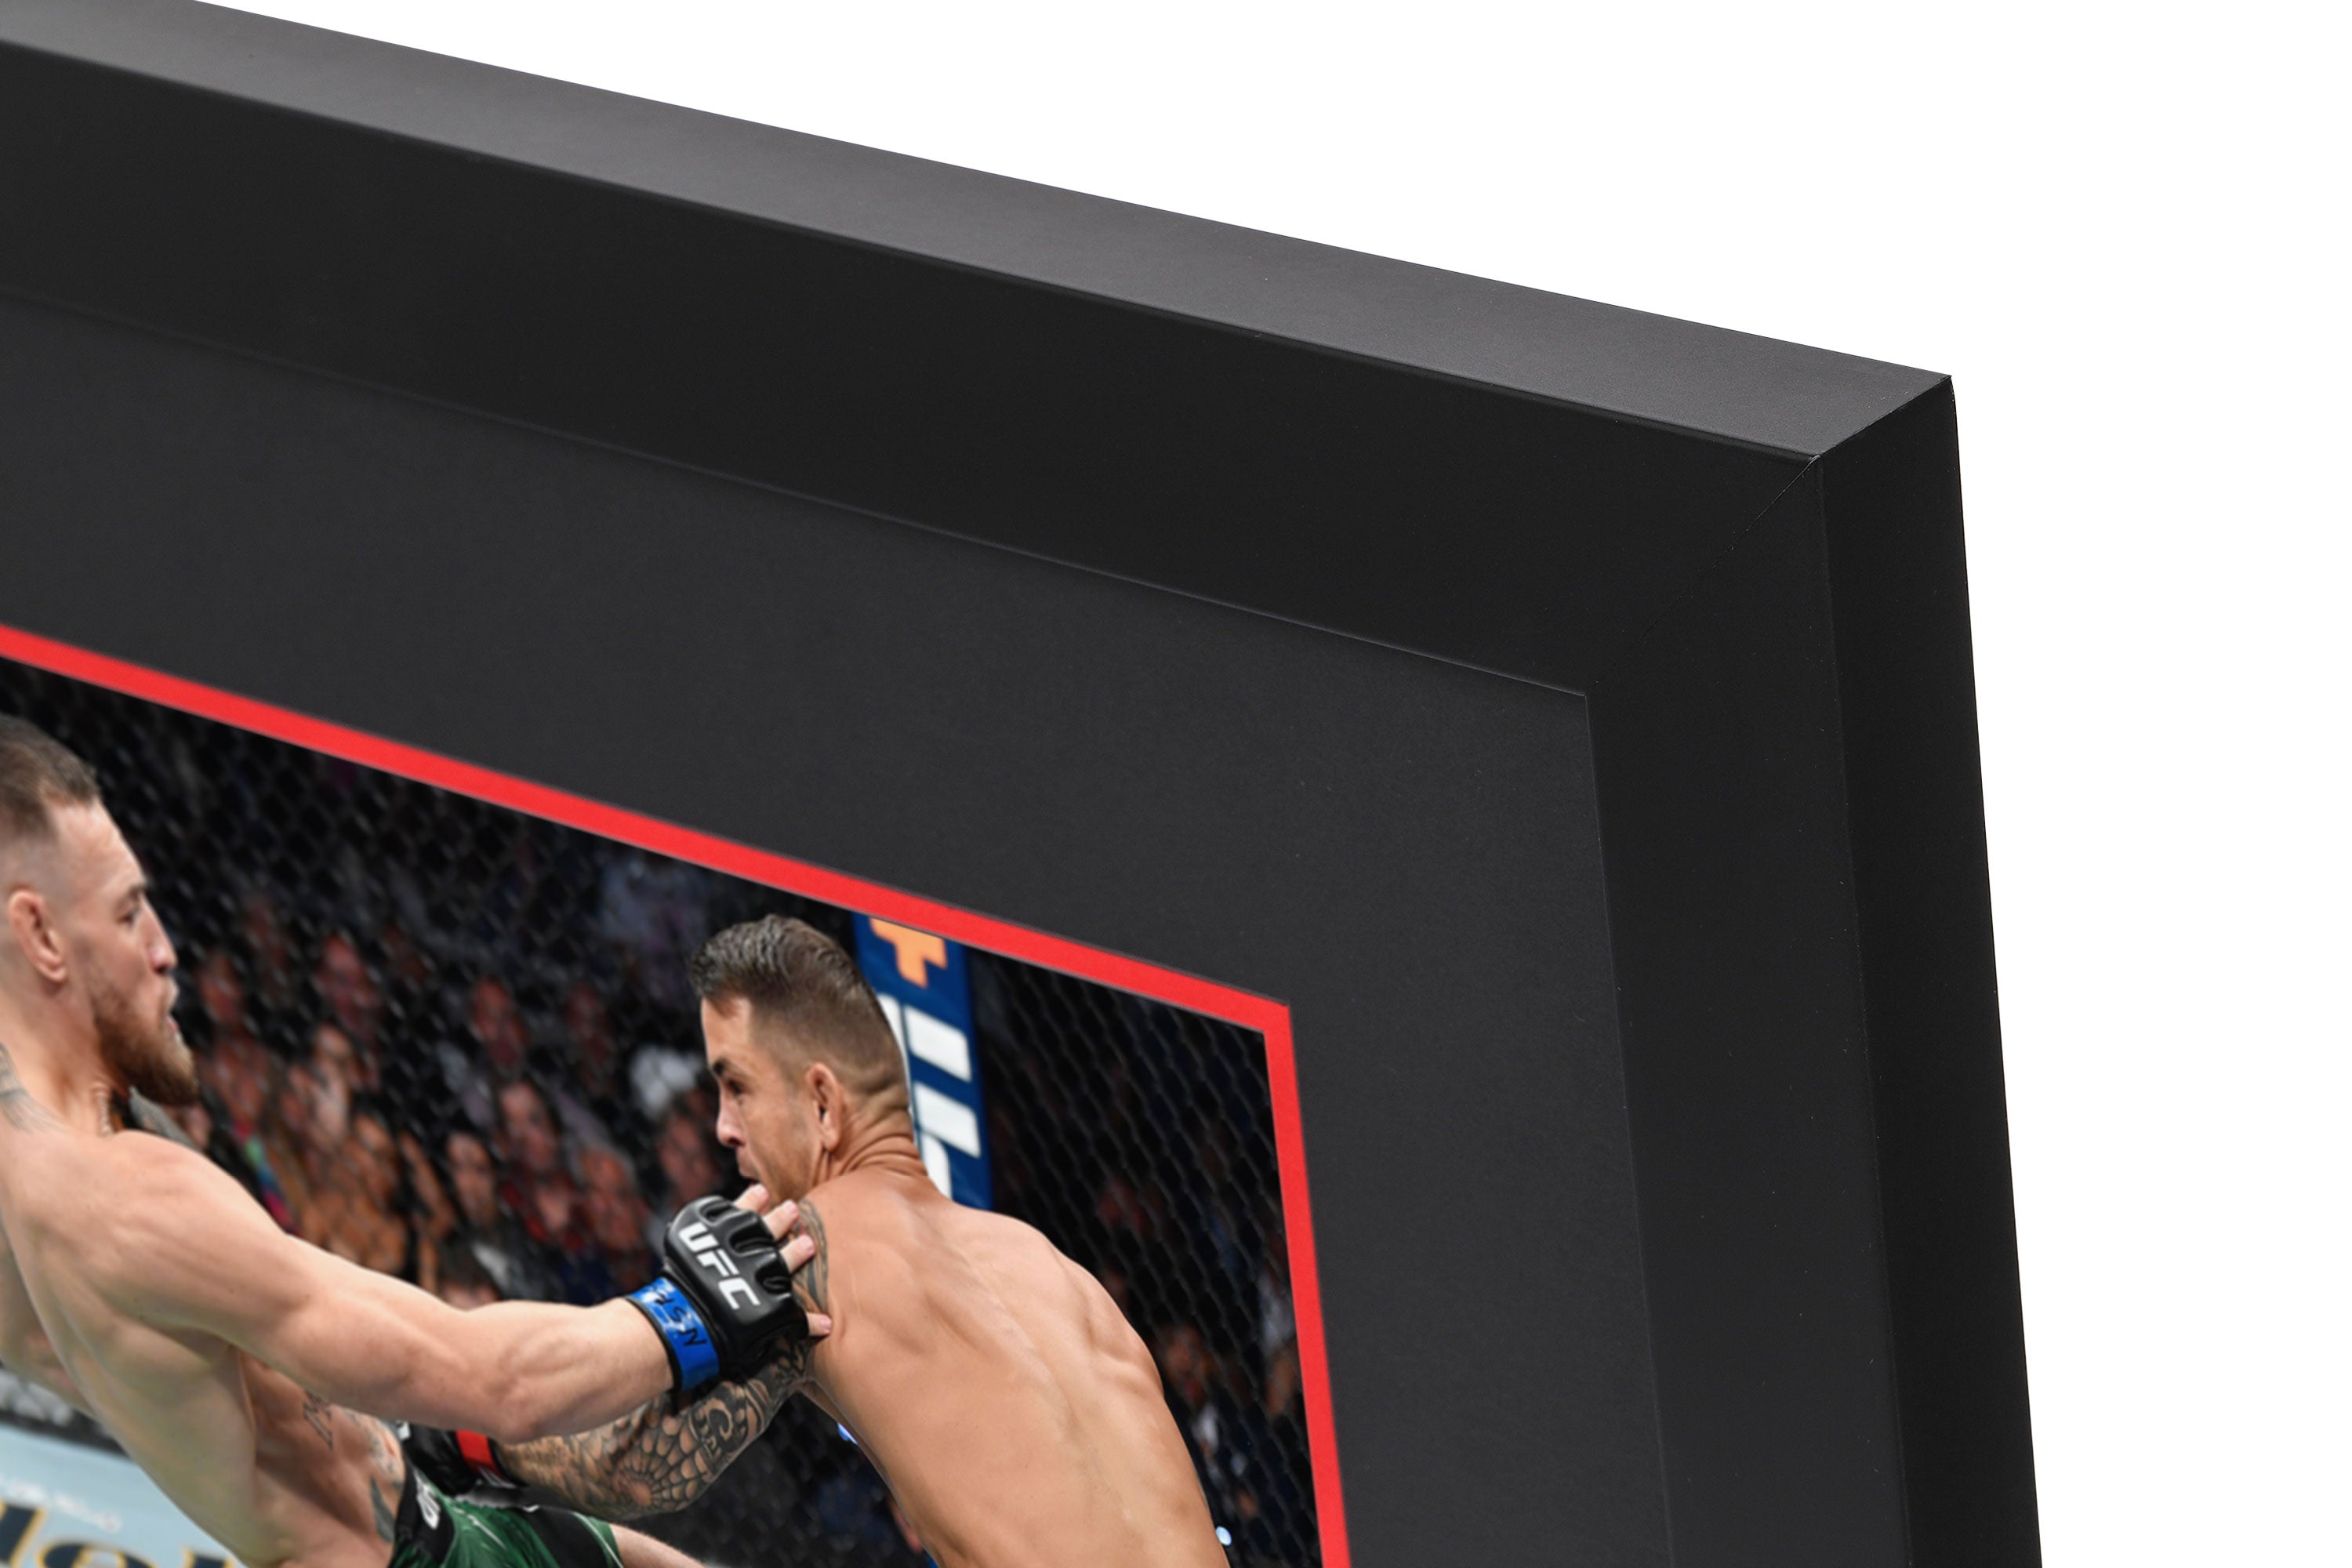 Canvas & Photo from the Poirier vs Mcgregor UFC 264 event 